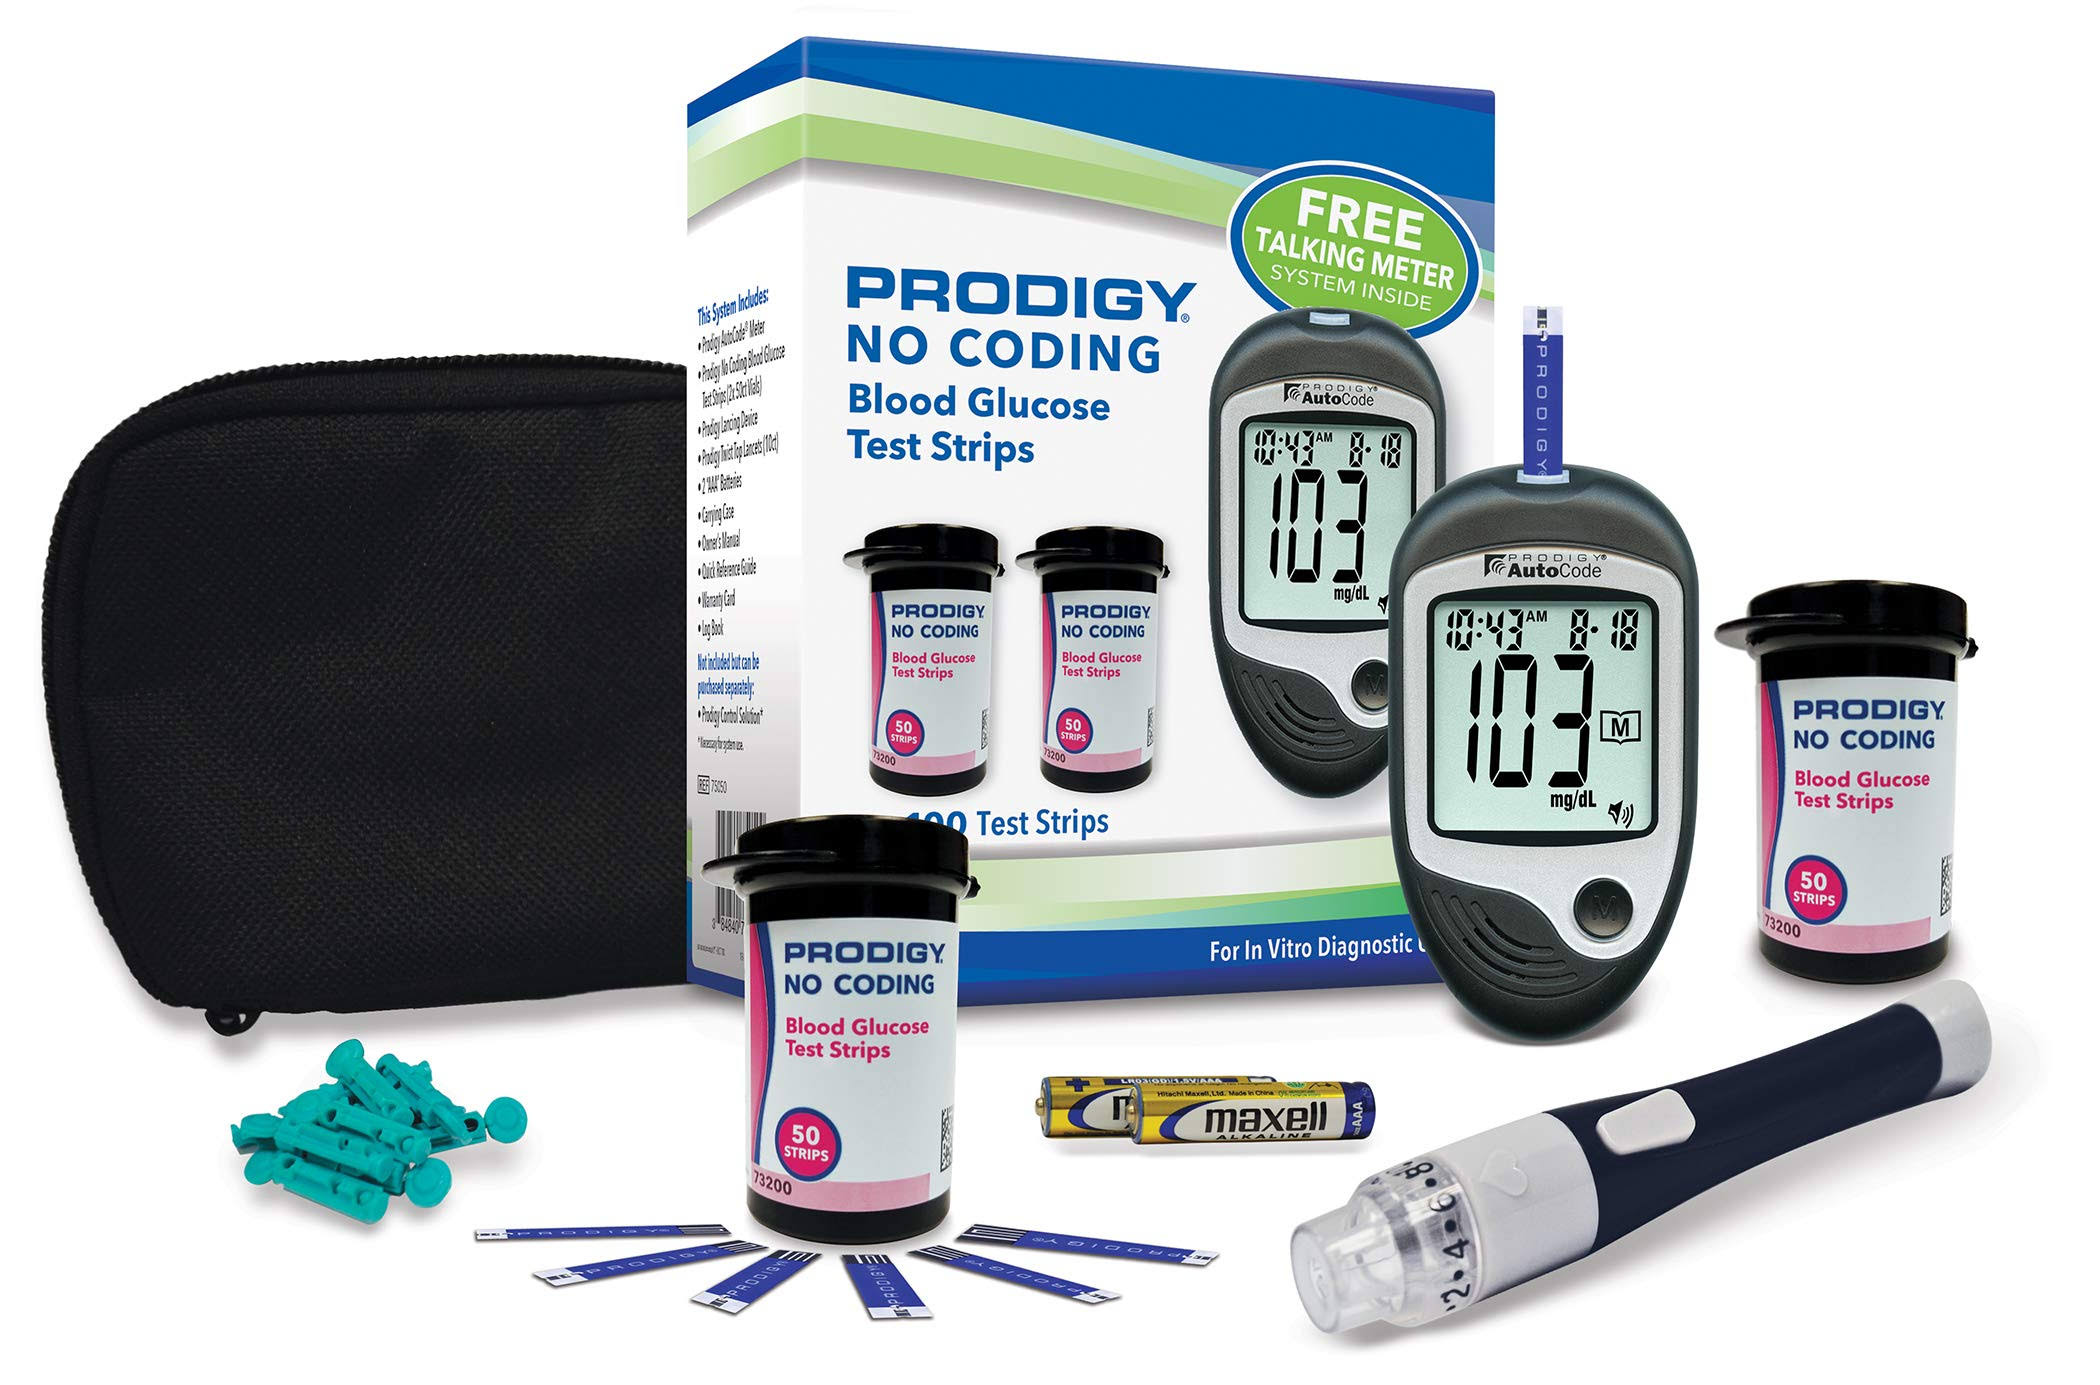 Prodigy Glucose Monitor Kit Includes Prodigy Meter 100 Test Strips 10 Lancets